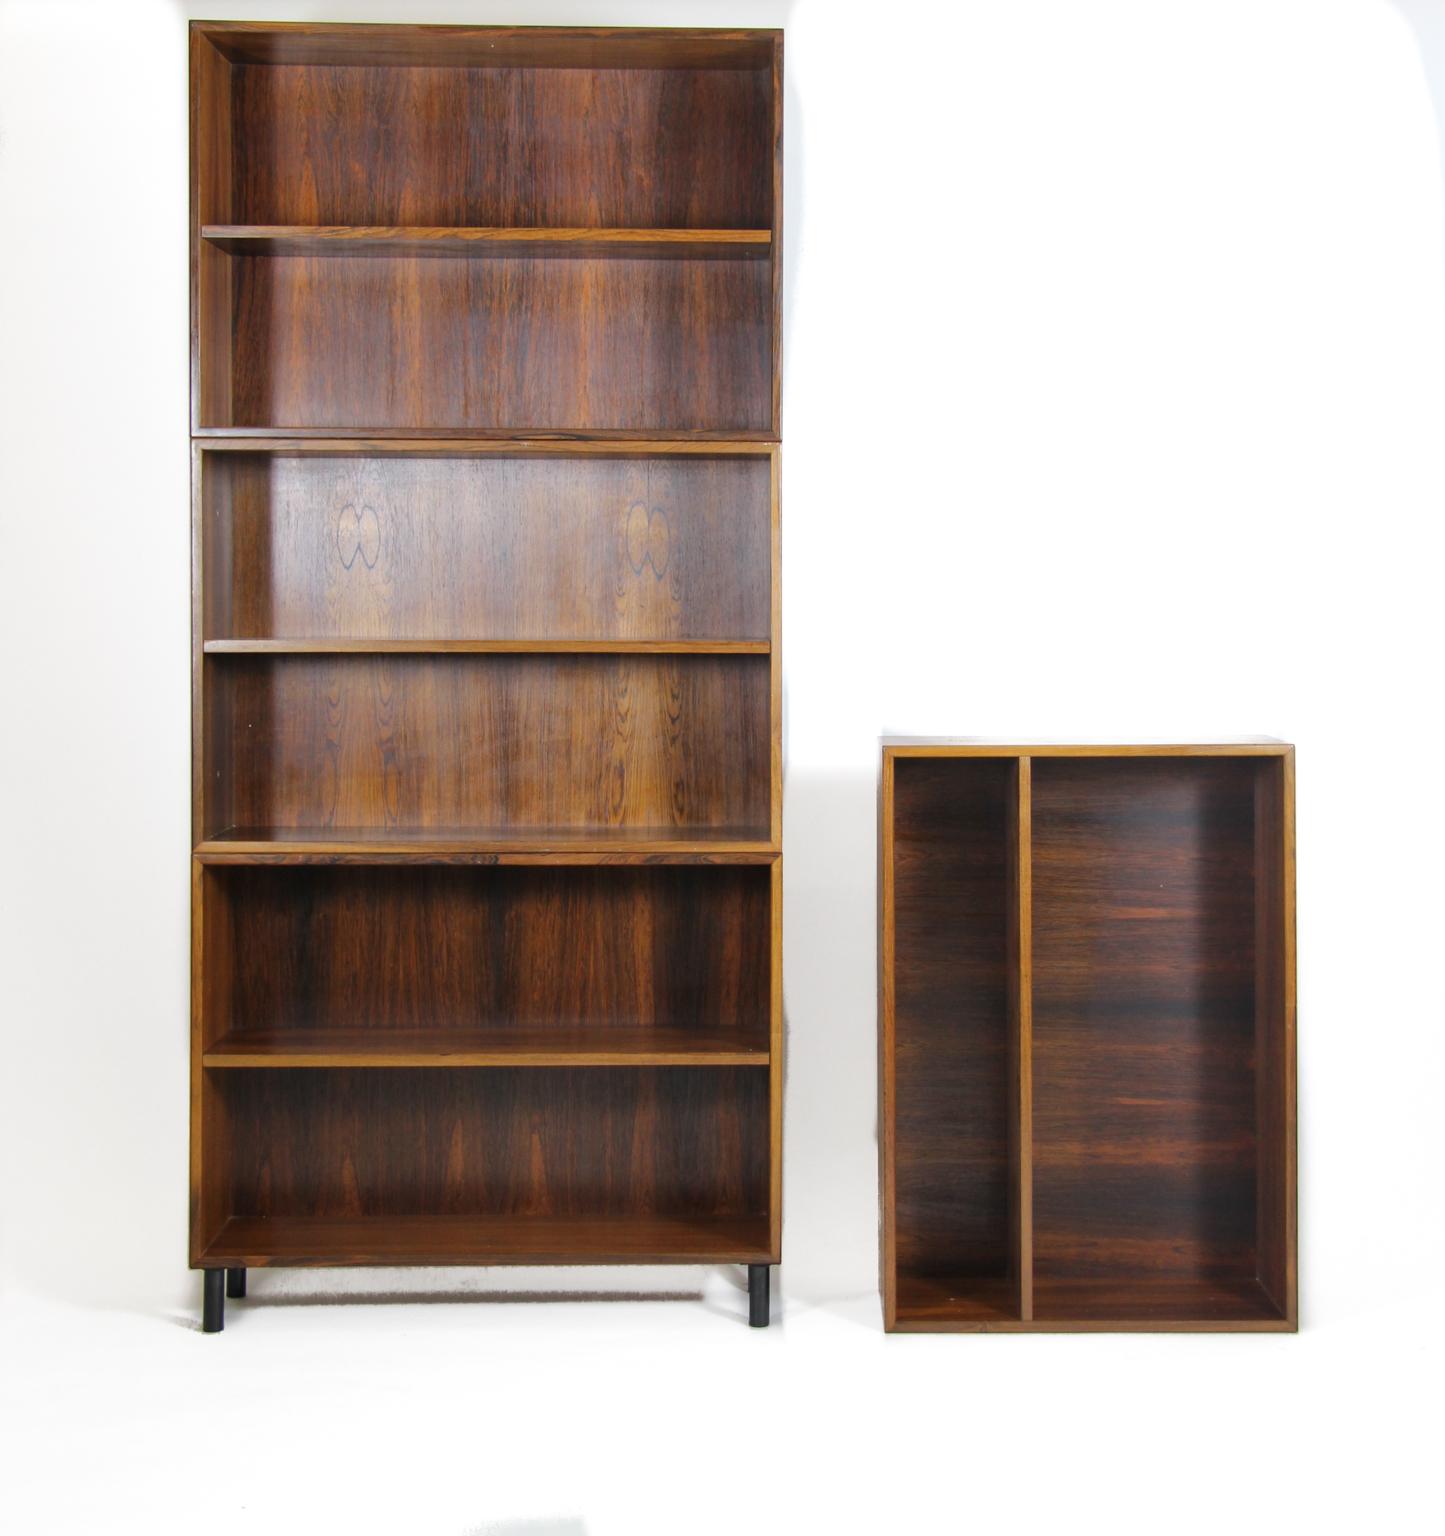 Rosewood Small Bookcases with Metal Black Legs, Made in Denmark, 1960s In Good Condition For Sale In Enschede, Overijssel